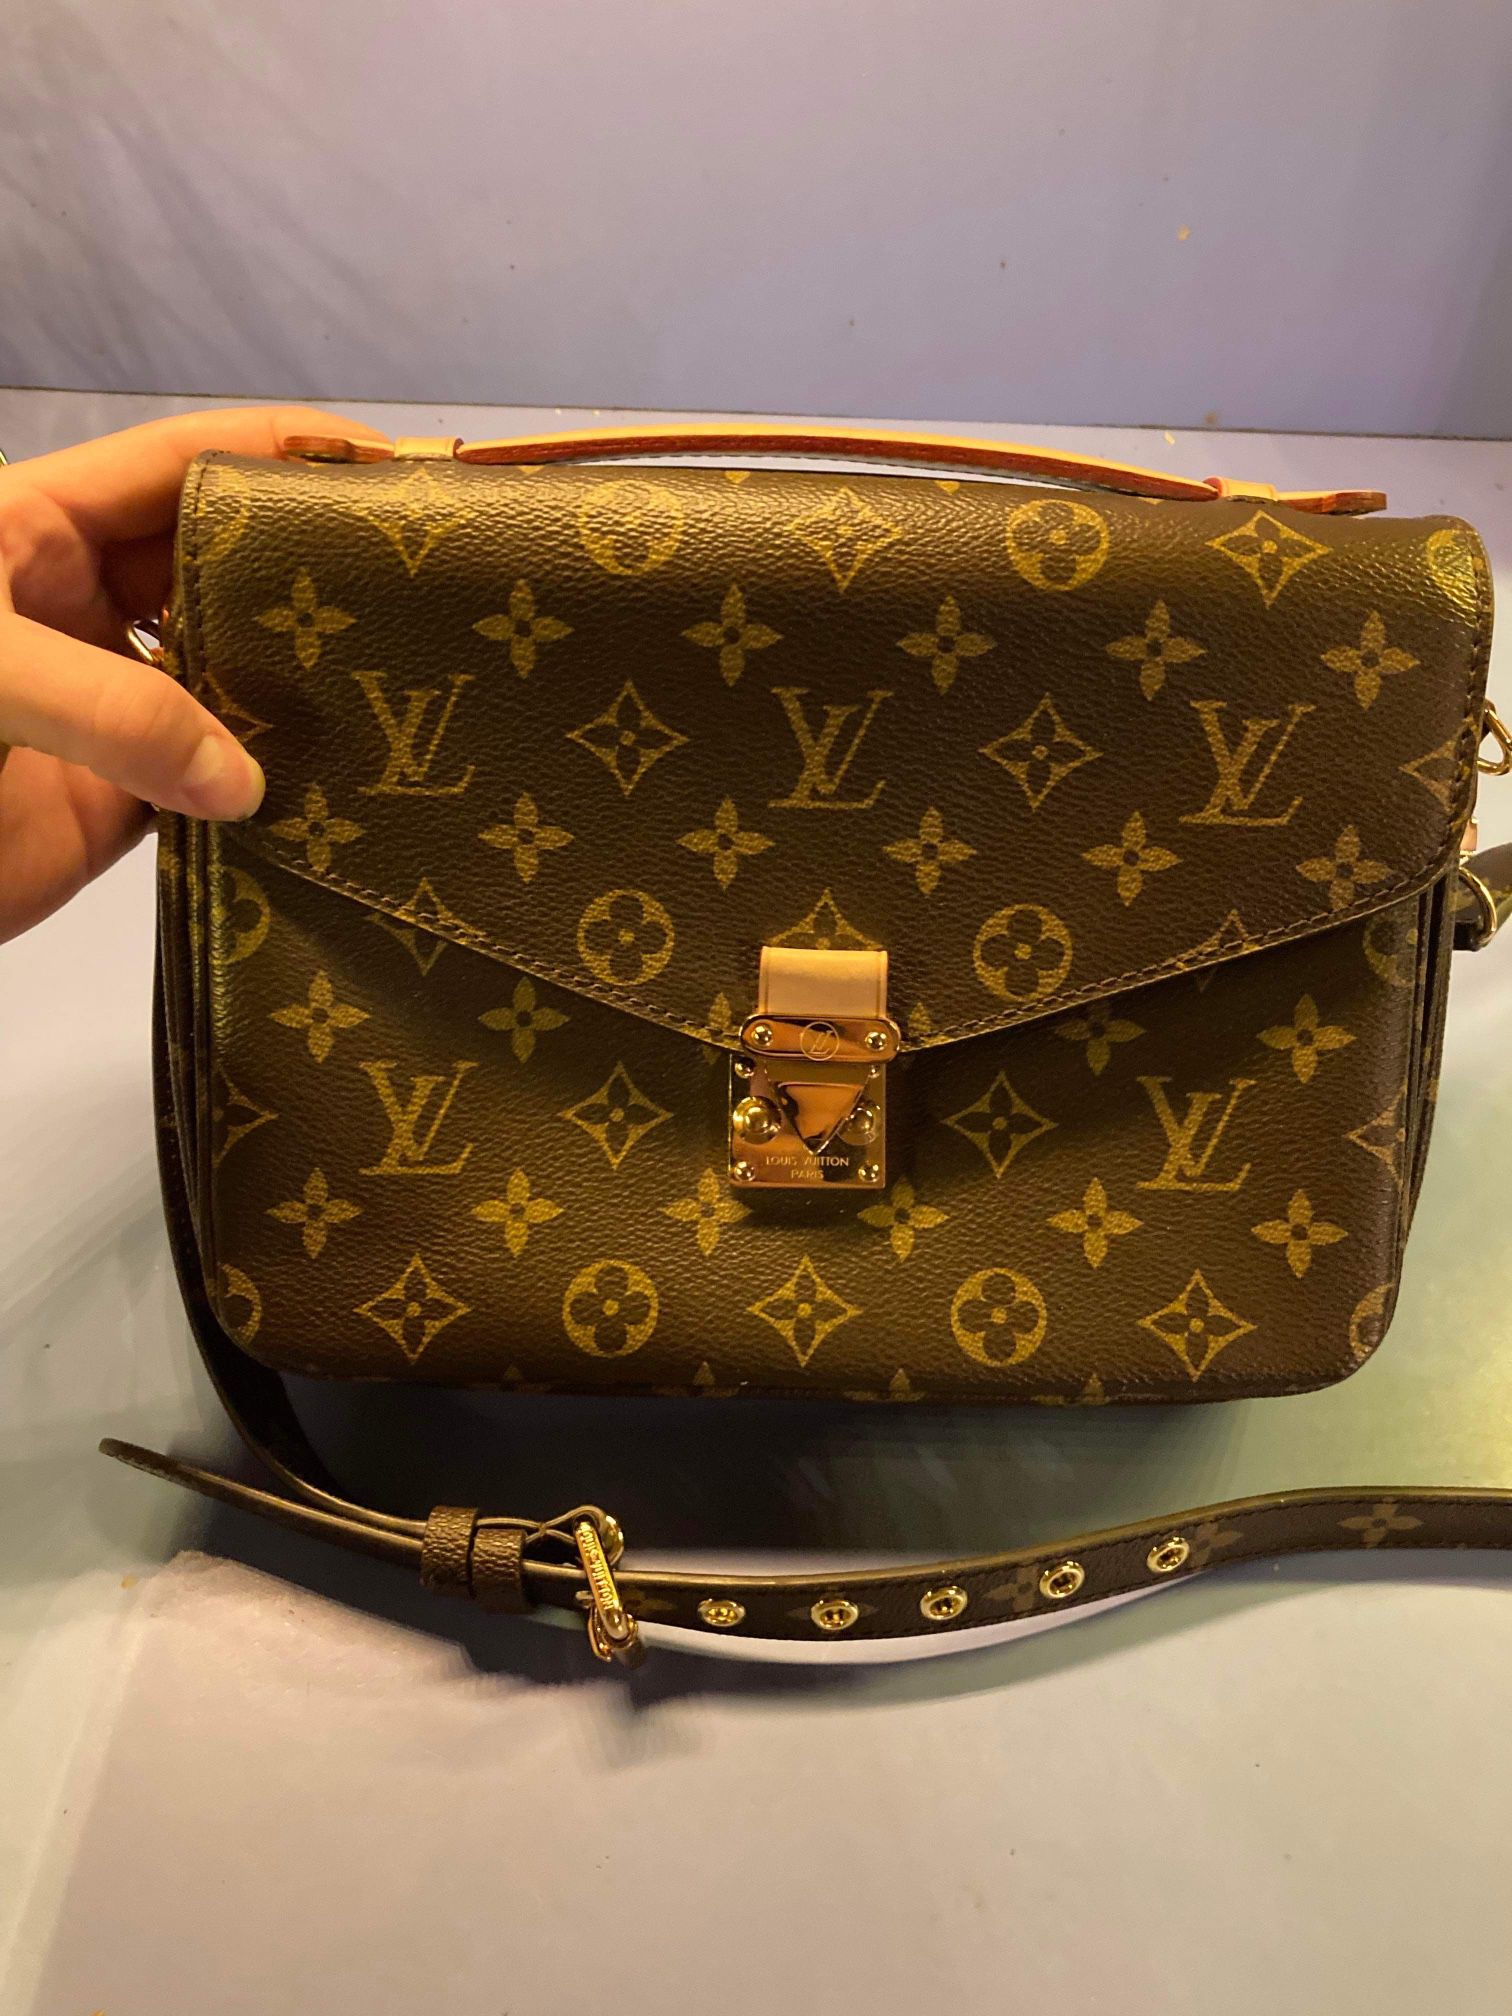 Louis Vuitton Looping GM Shoulder Bag for Sale in Carefree, AZ - OfferUp